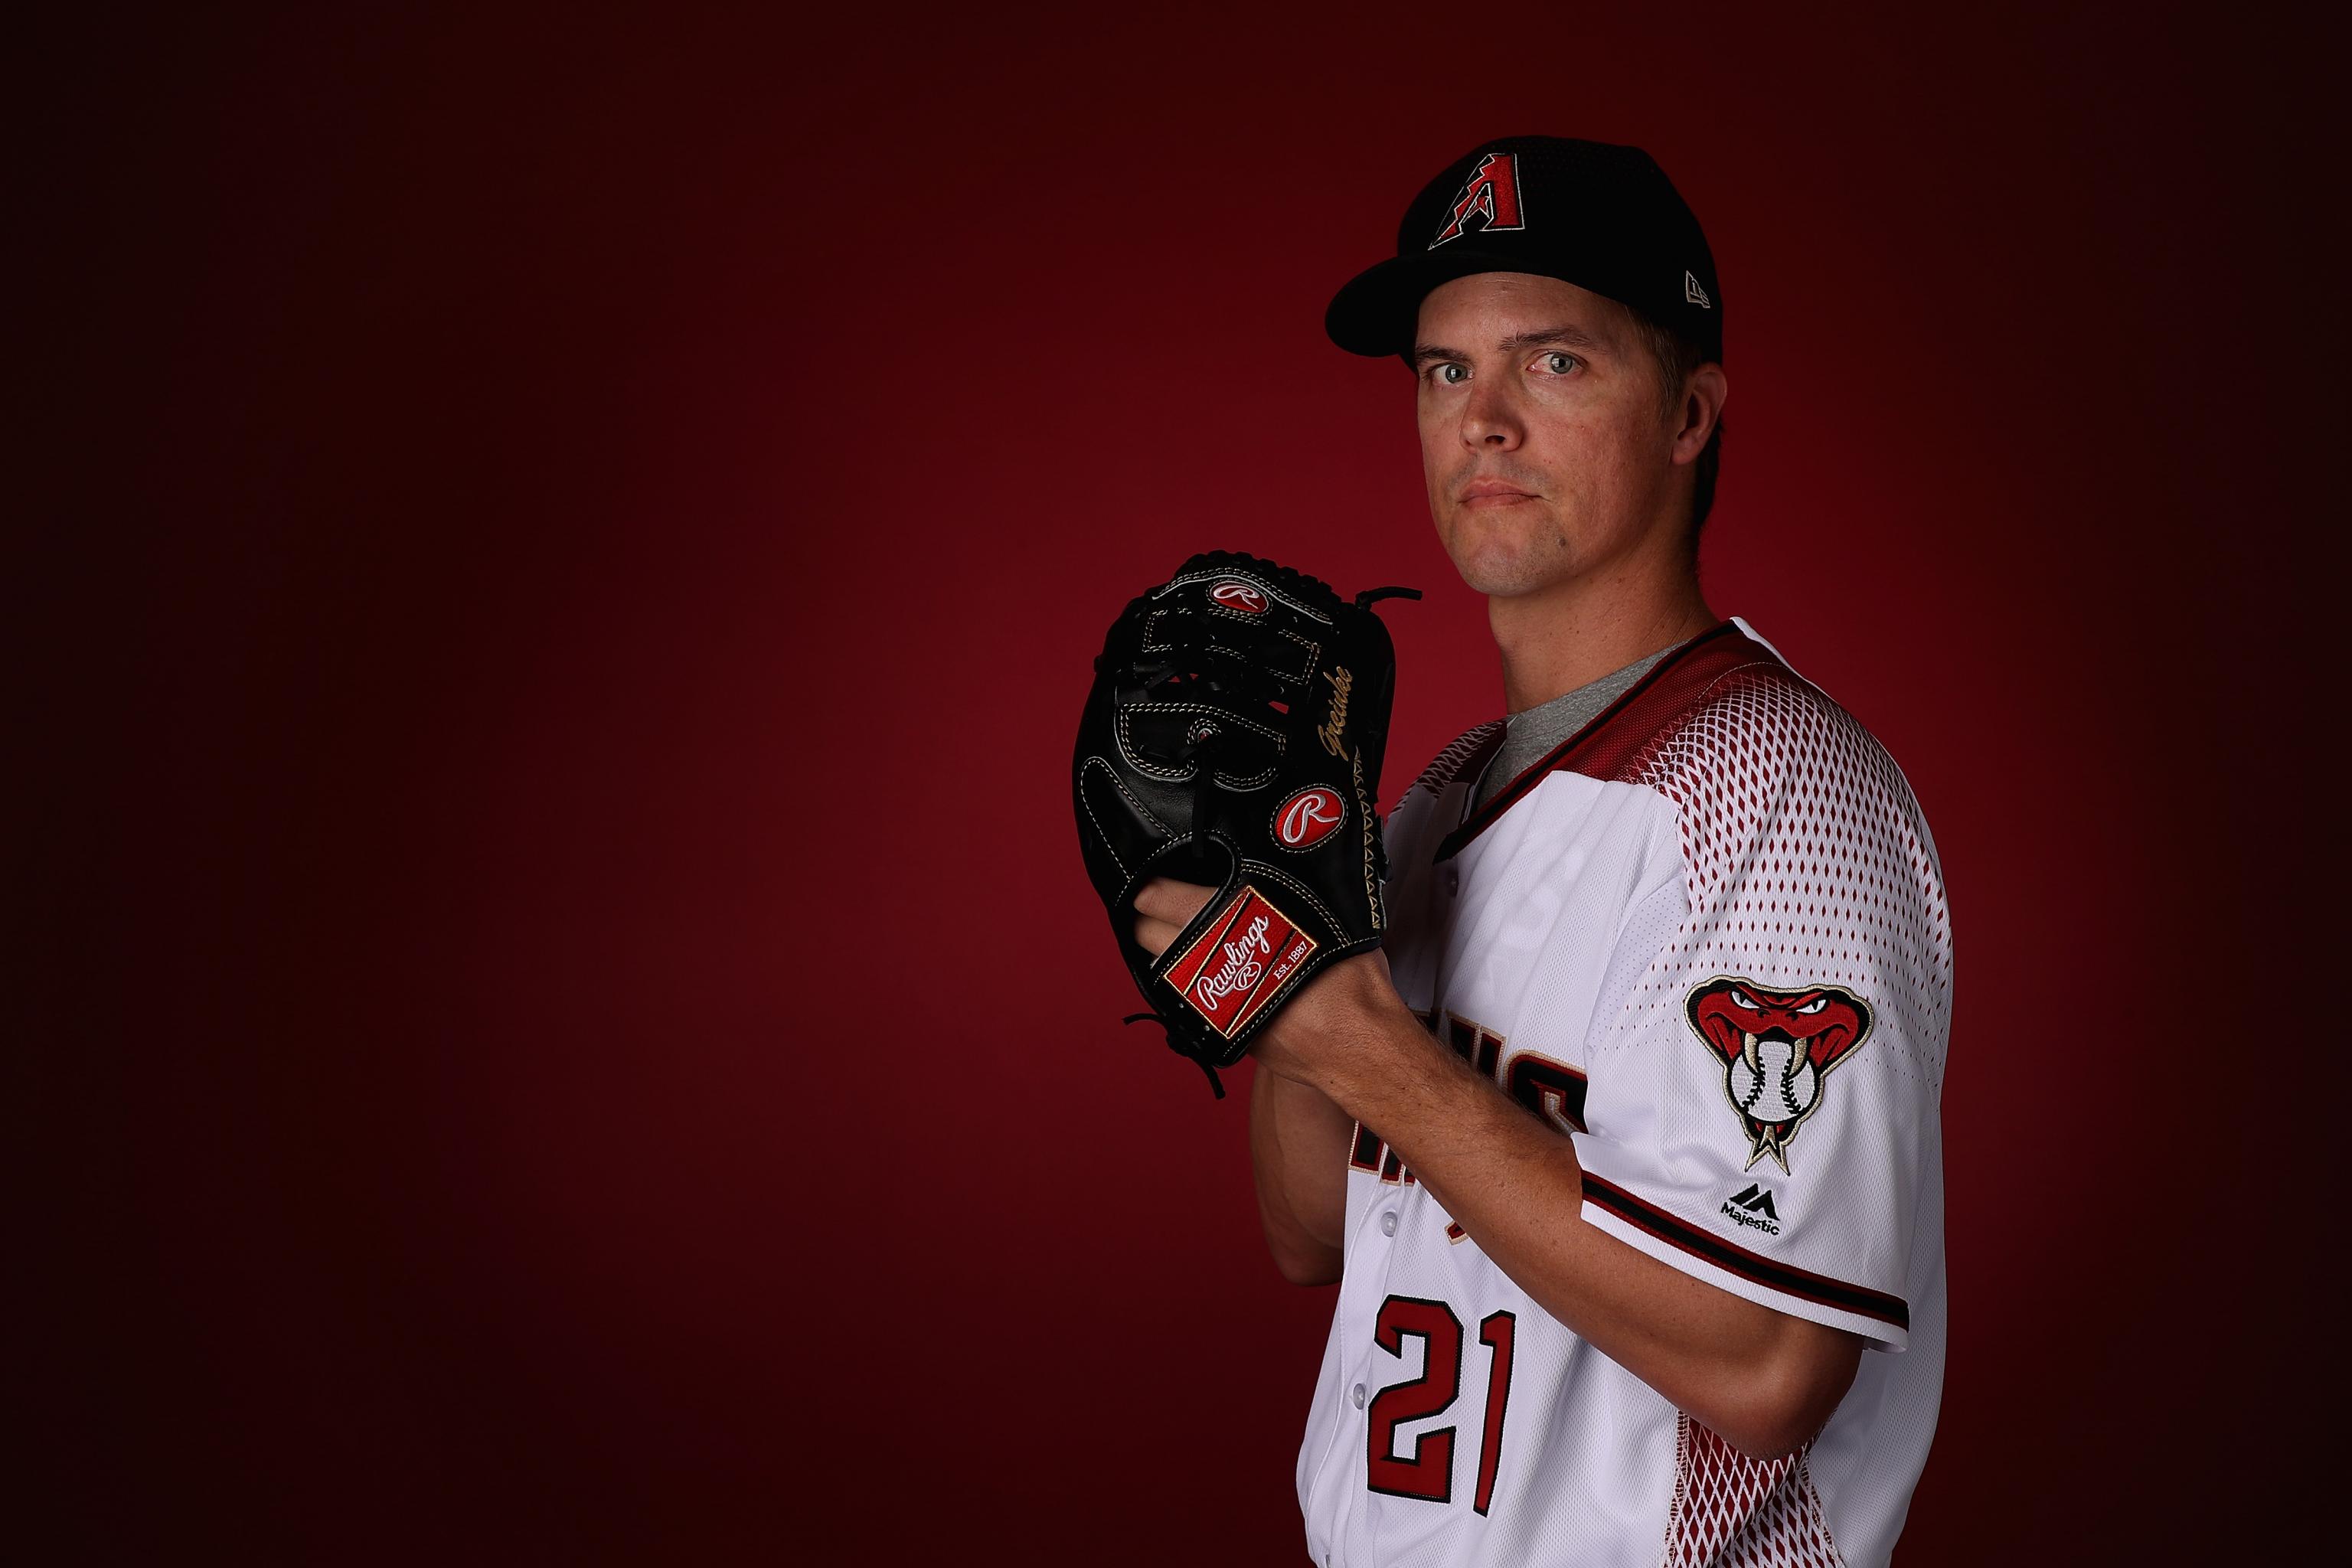 The mystic mind of Zack Greinke during his time with Arizona